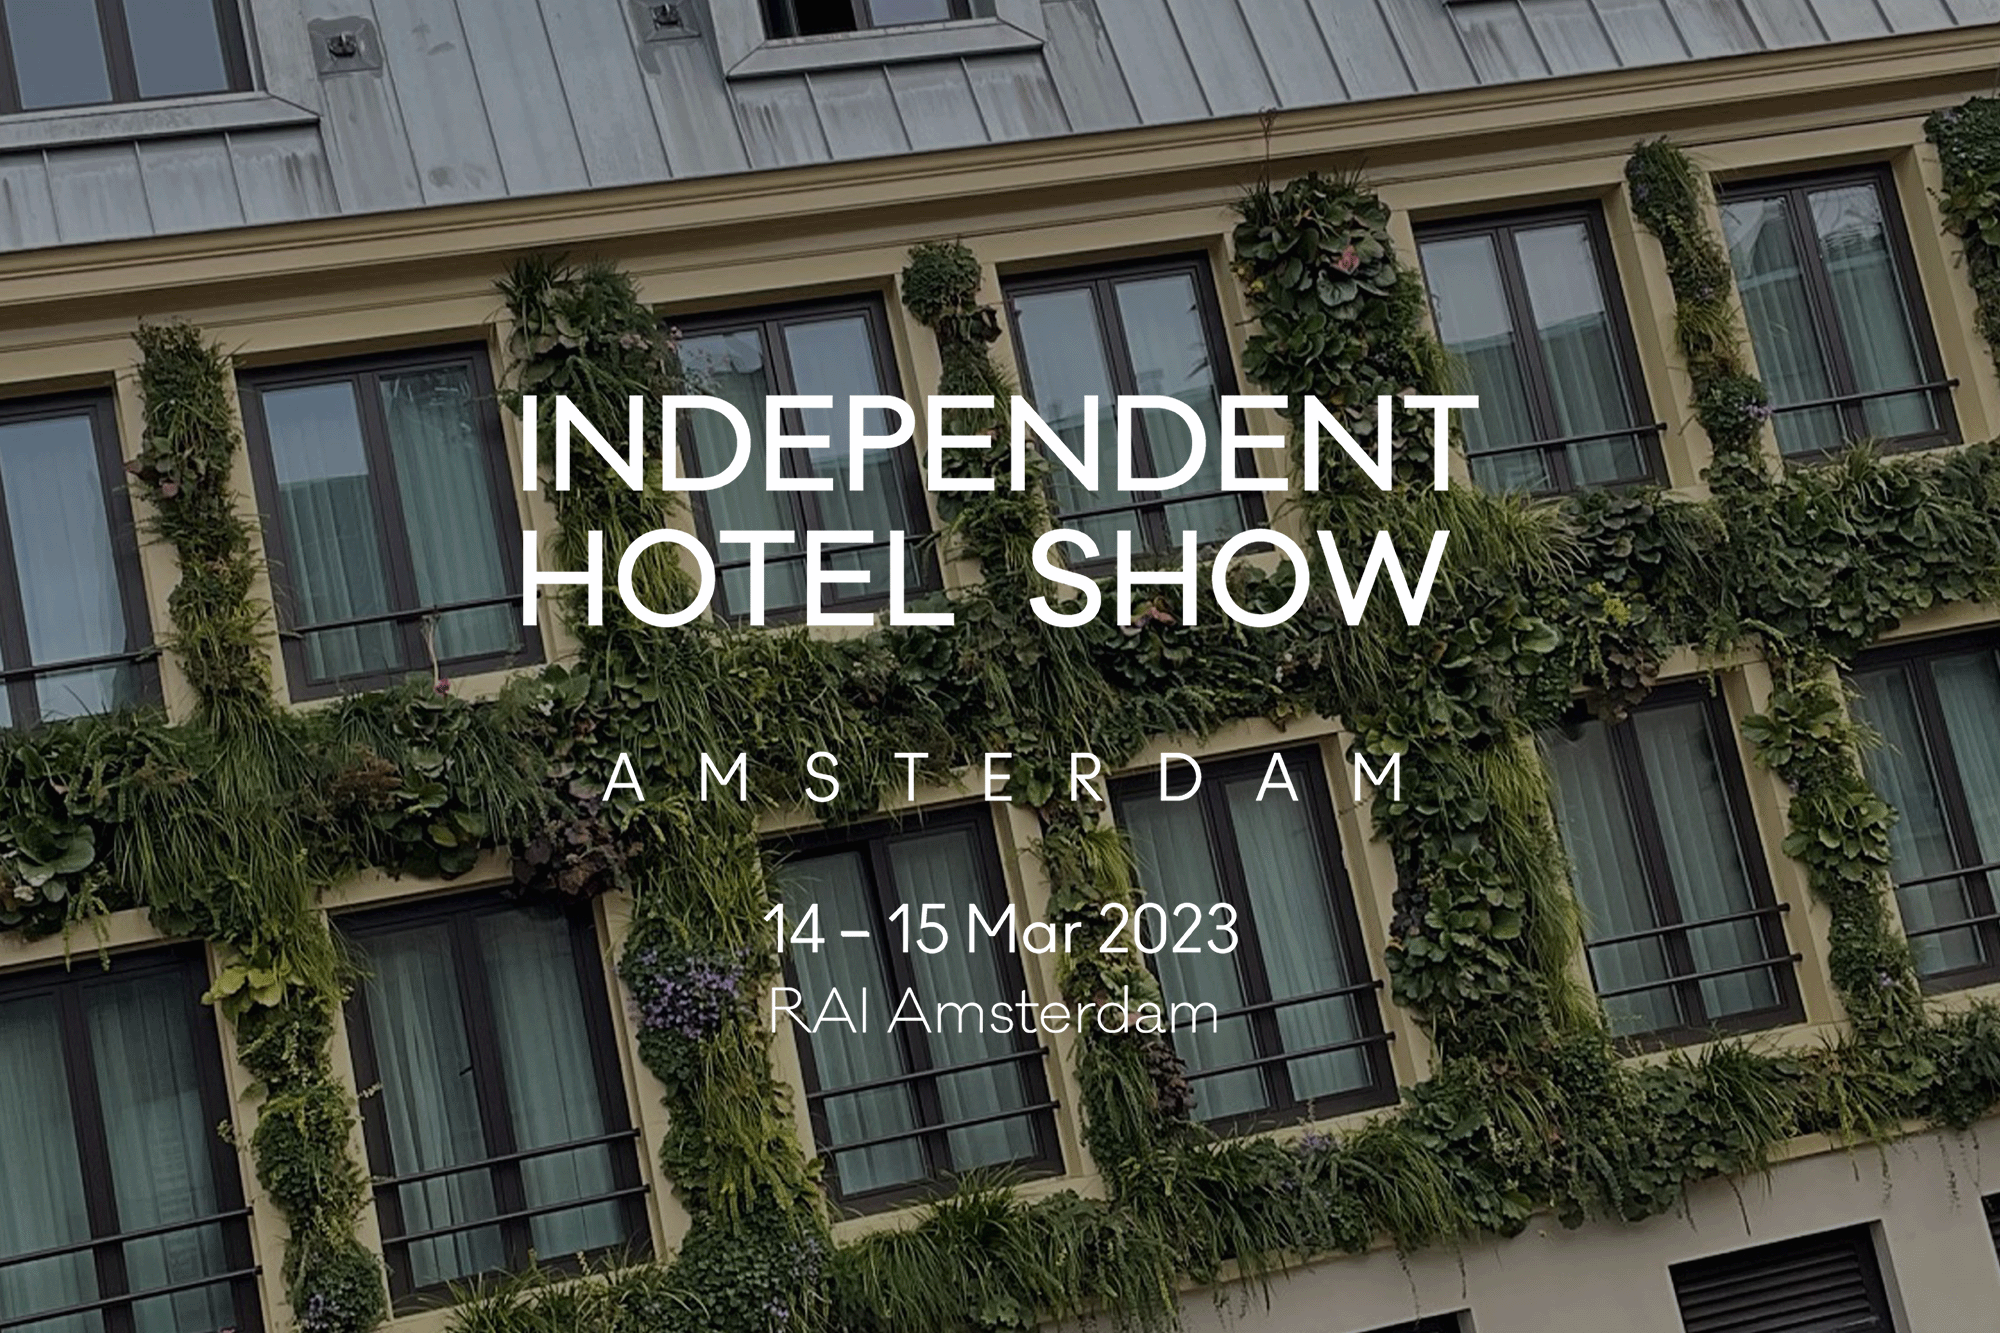 Visit the Independent Hotel Show Amsterdam